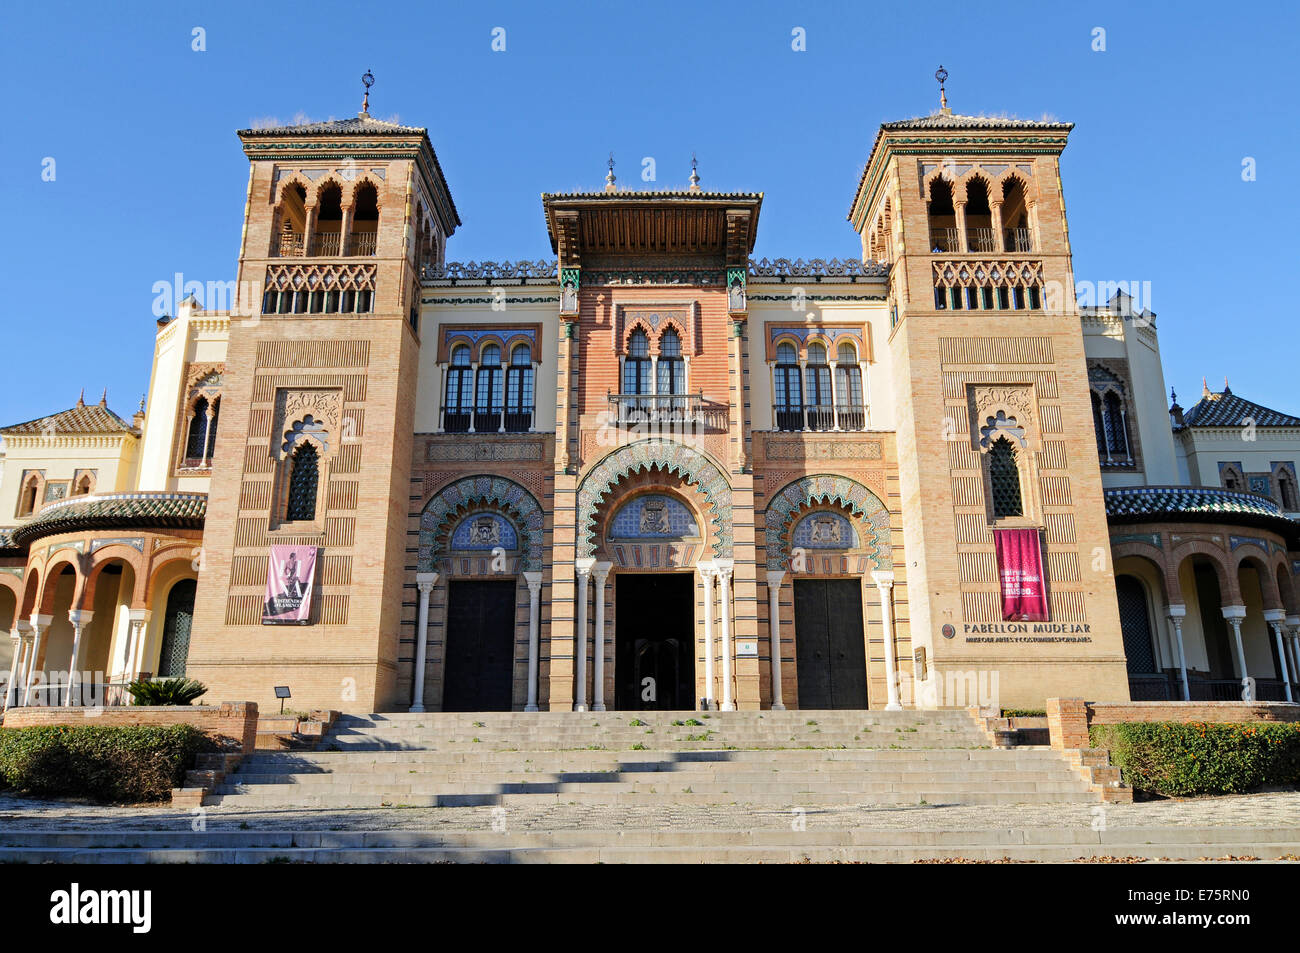 Museo de Artes Populares y Costumbres, museum of arts and folklore, Pabellón Mudejar, Seville, Andalusia, Spain Stock Photo